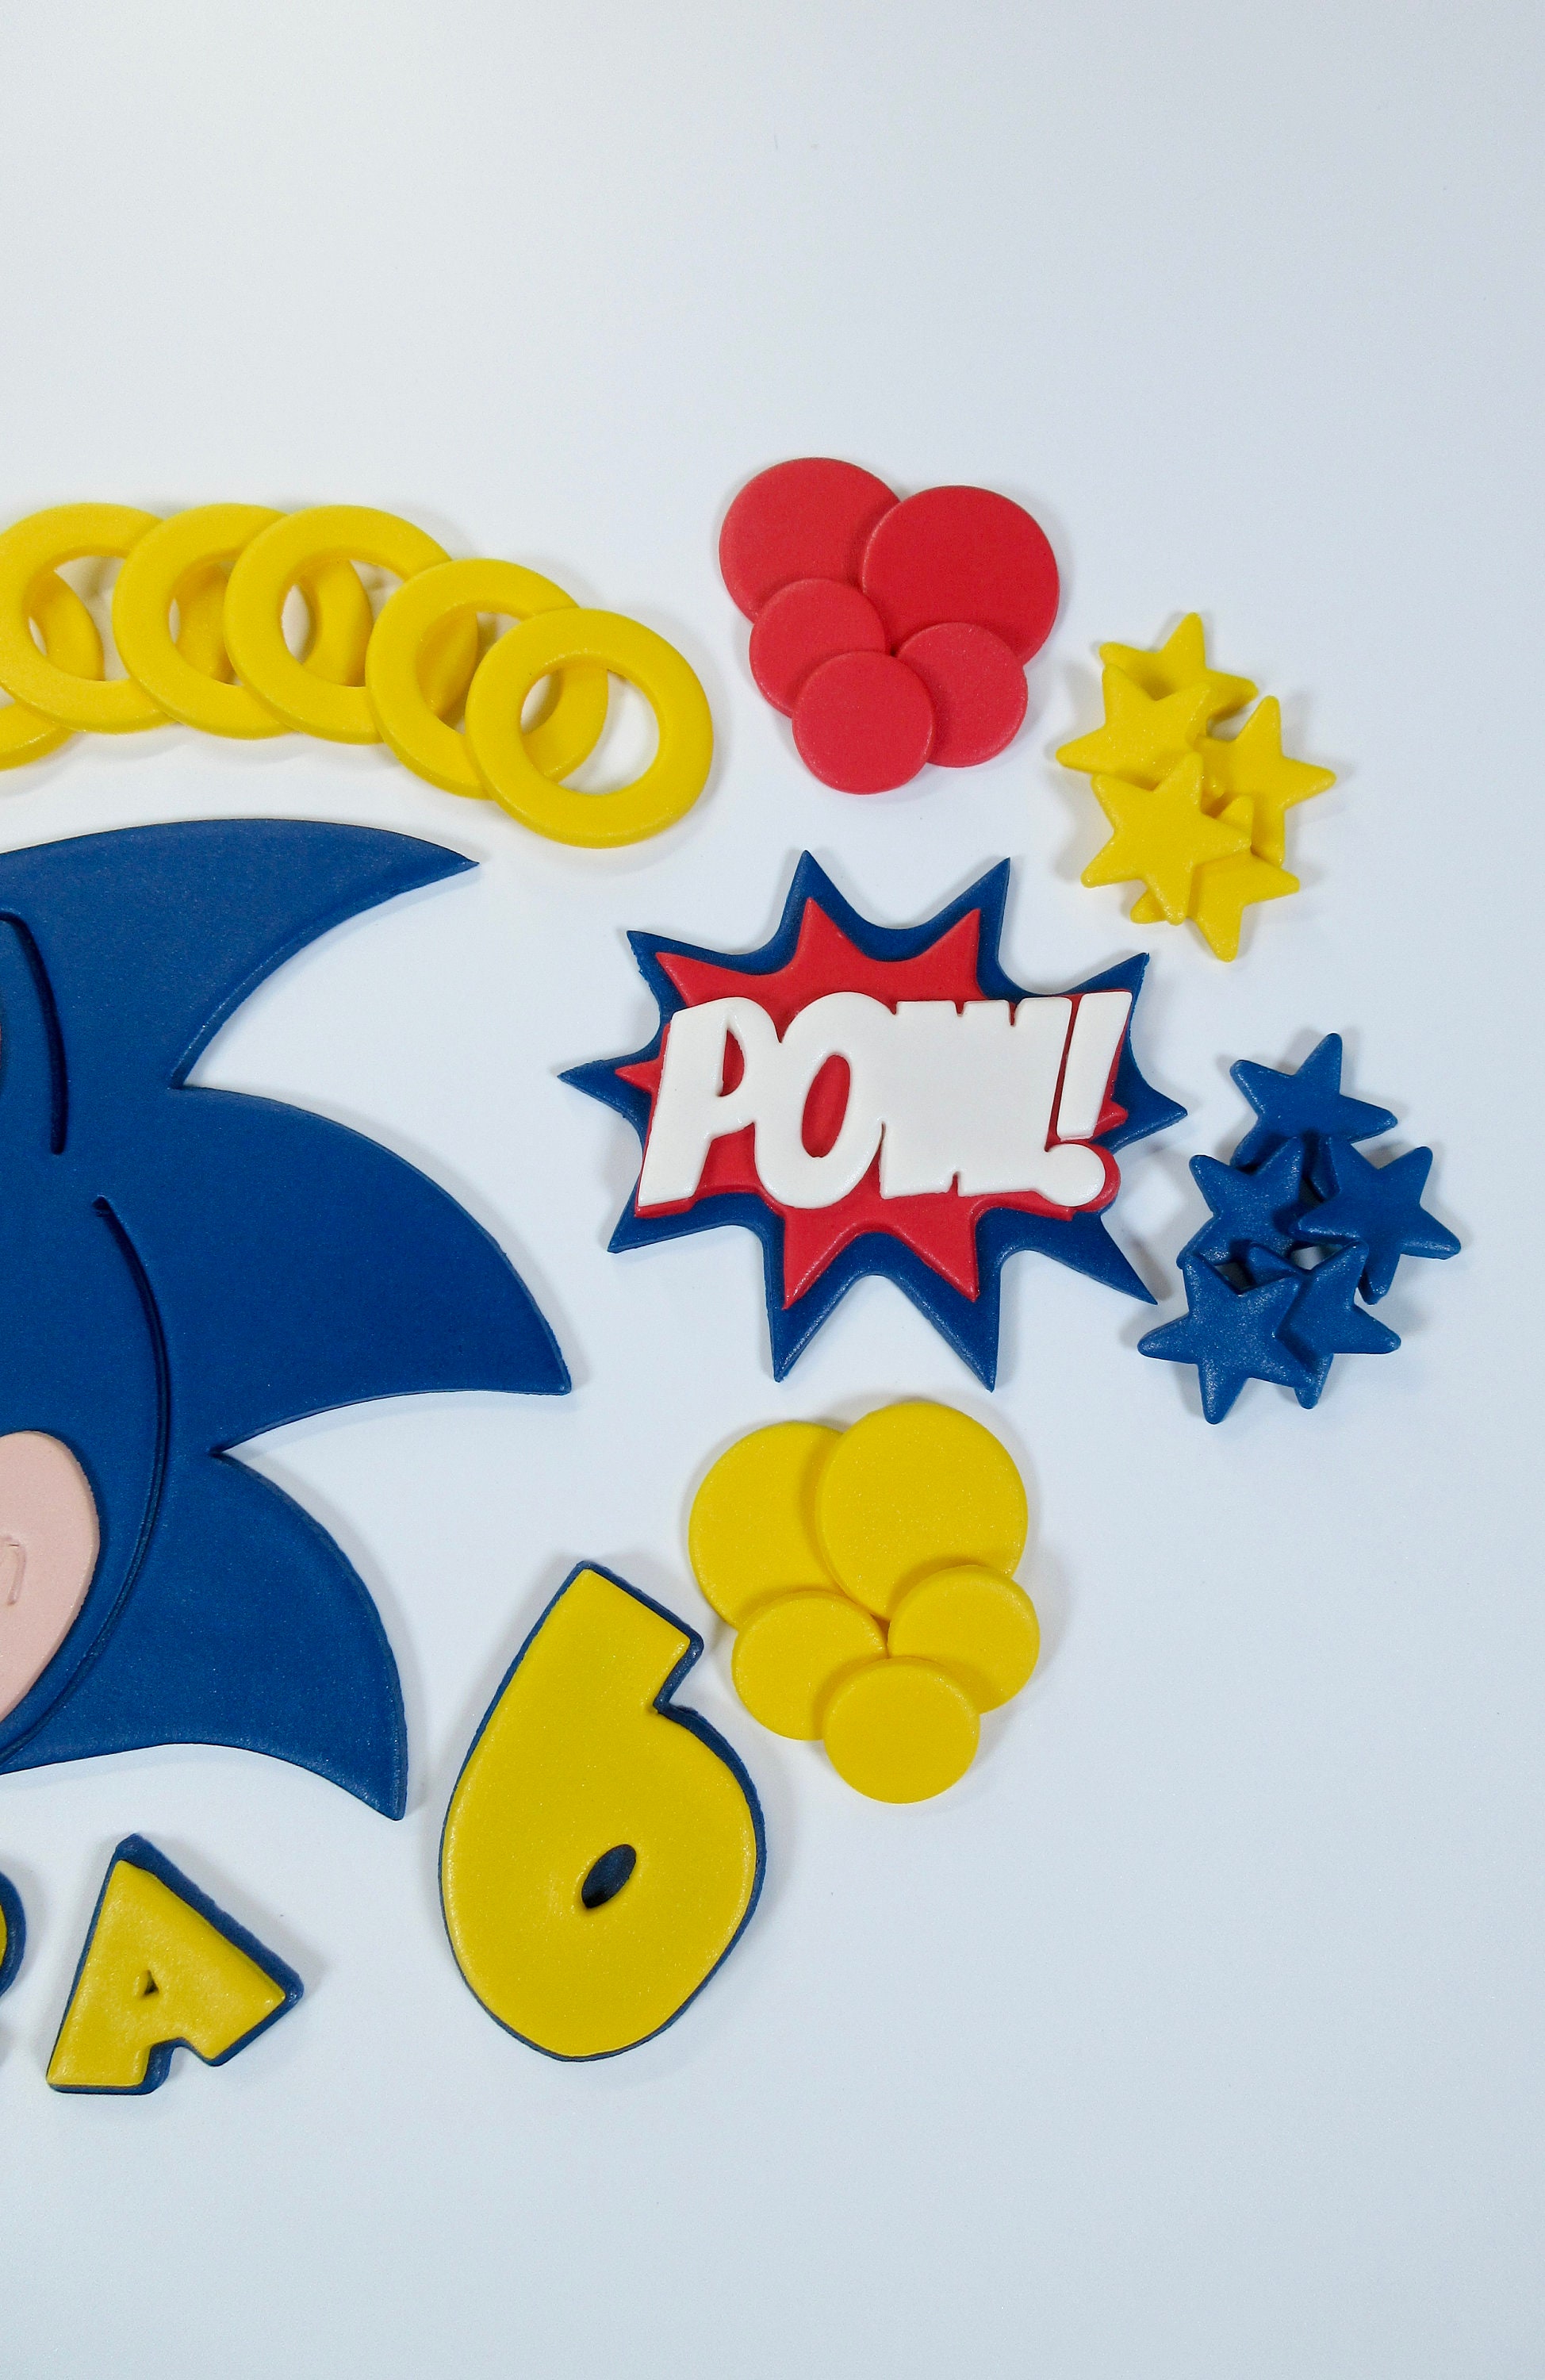 33 Piece Sonic Cake Toppers with 1 Cake Topper, 16 Cupcake Toppers